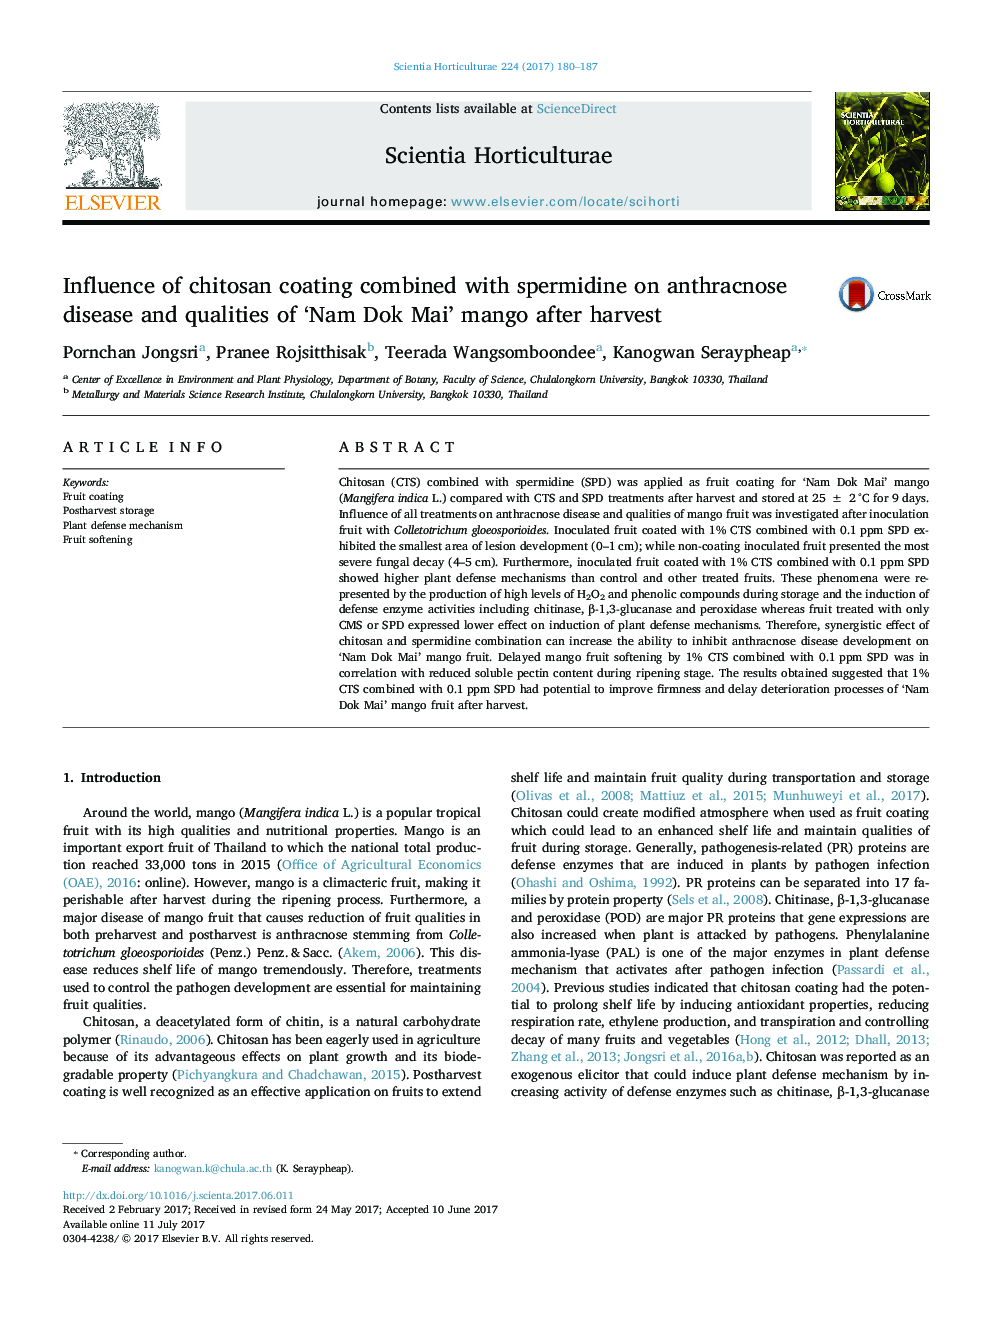 Influence of chitosan coating combined with spermidine on anthracnose disease and qualities of 'Nam Dok Mai' mango after harvest